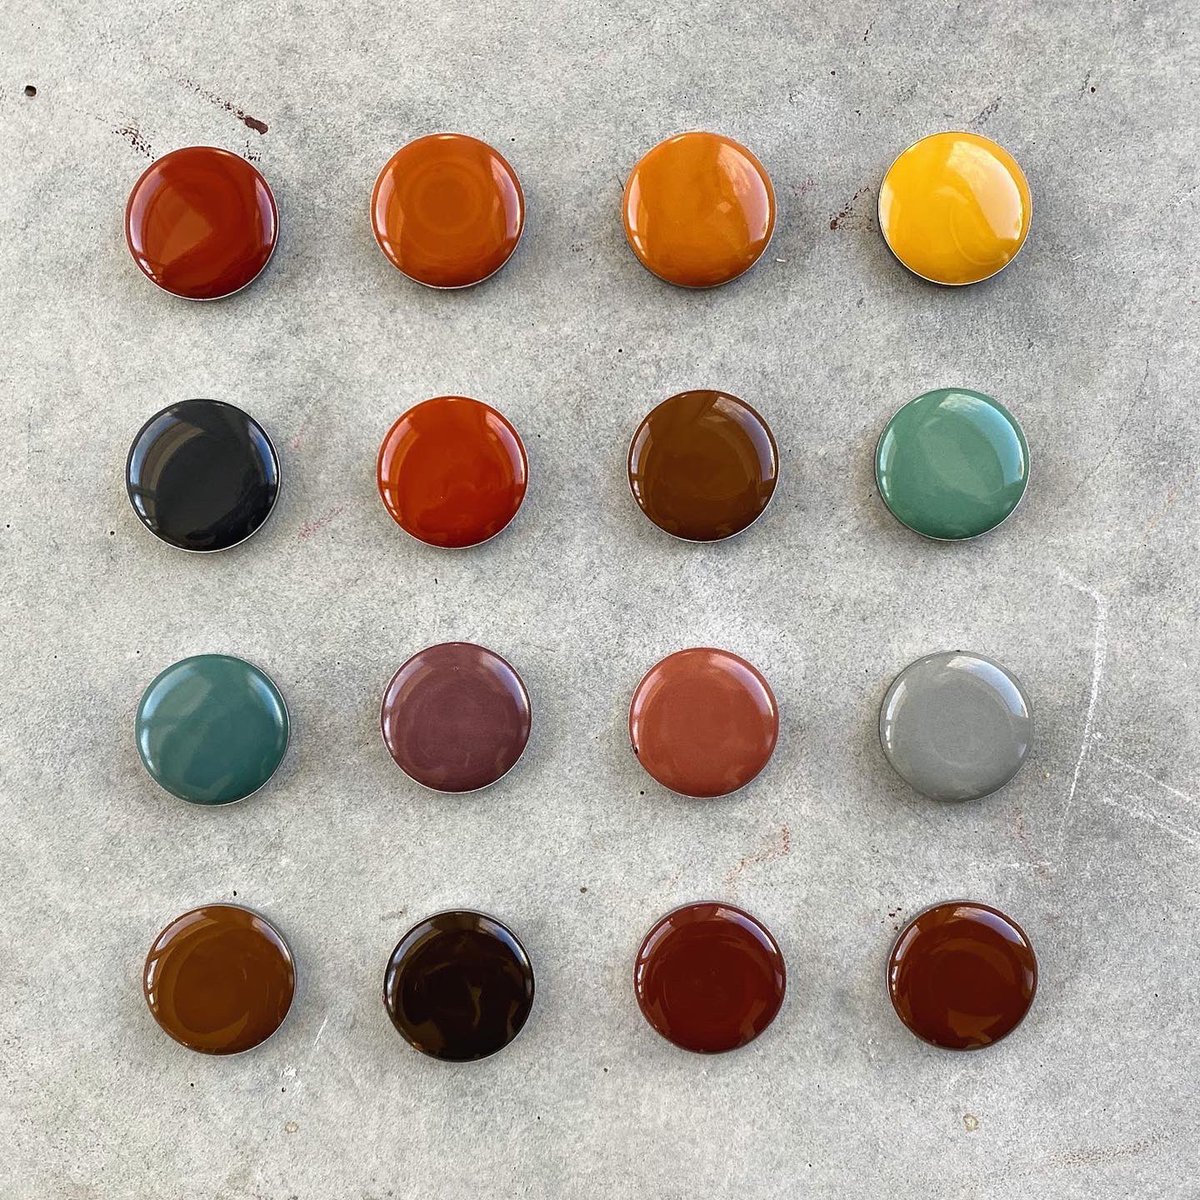 Happy International Color Day 🌈 Pans of soil-based watercolors - which row, column, or diagonal would you choose to paint with today?